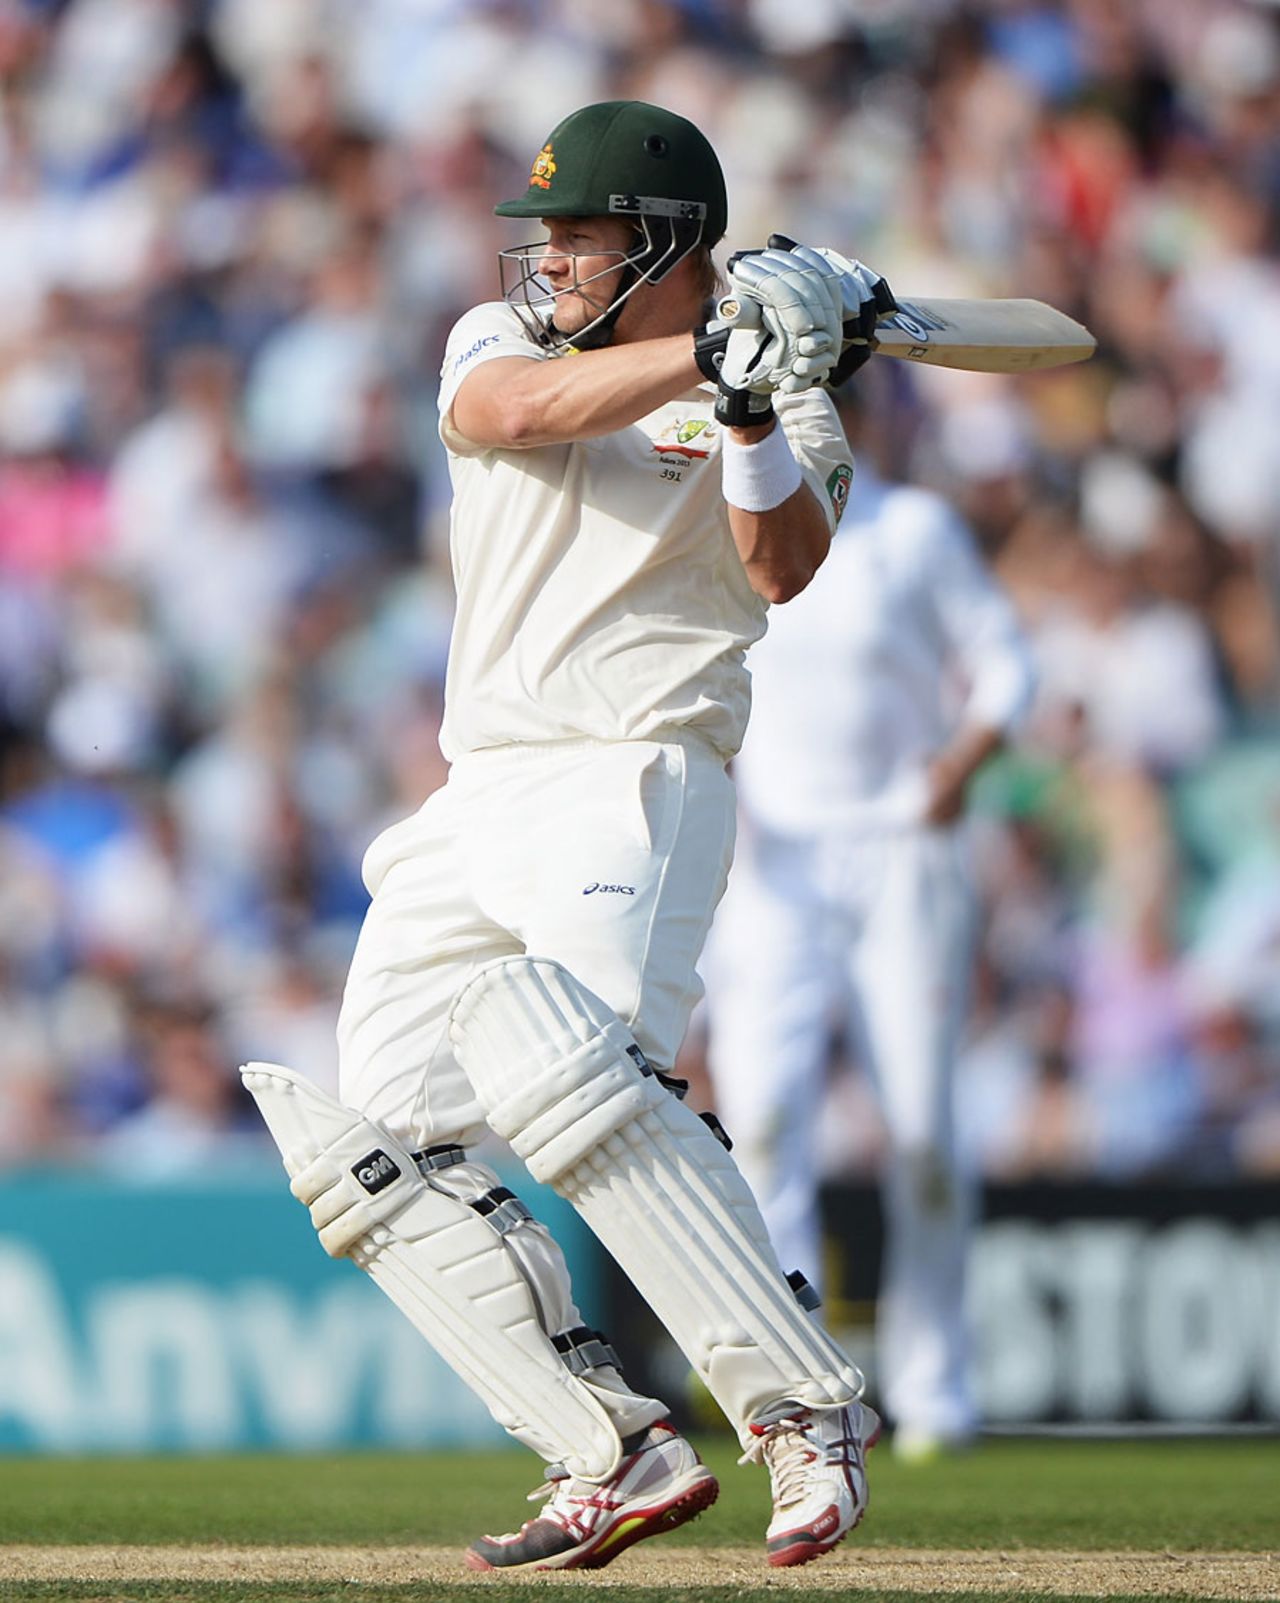 Shane Watson pulls away another short delivery, England v Australia, 5th Investec Test, The Oval, 1st day, August 21, 2013